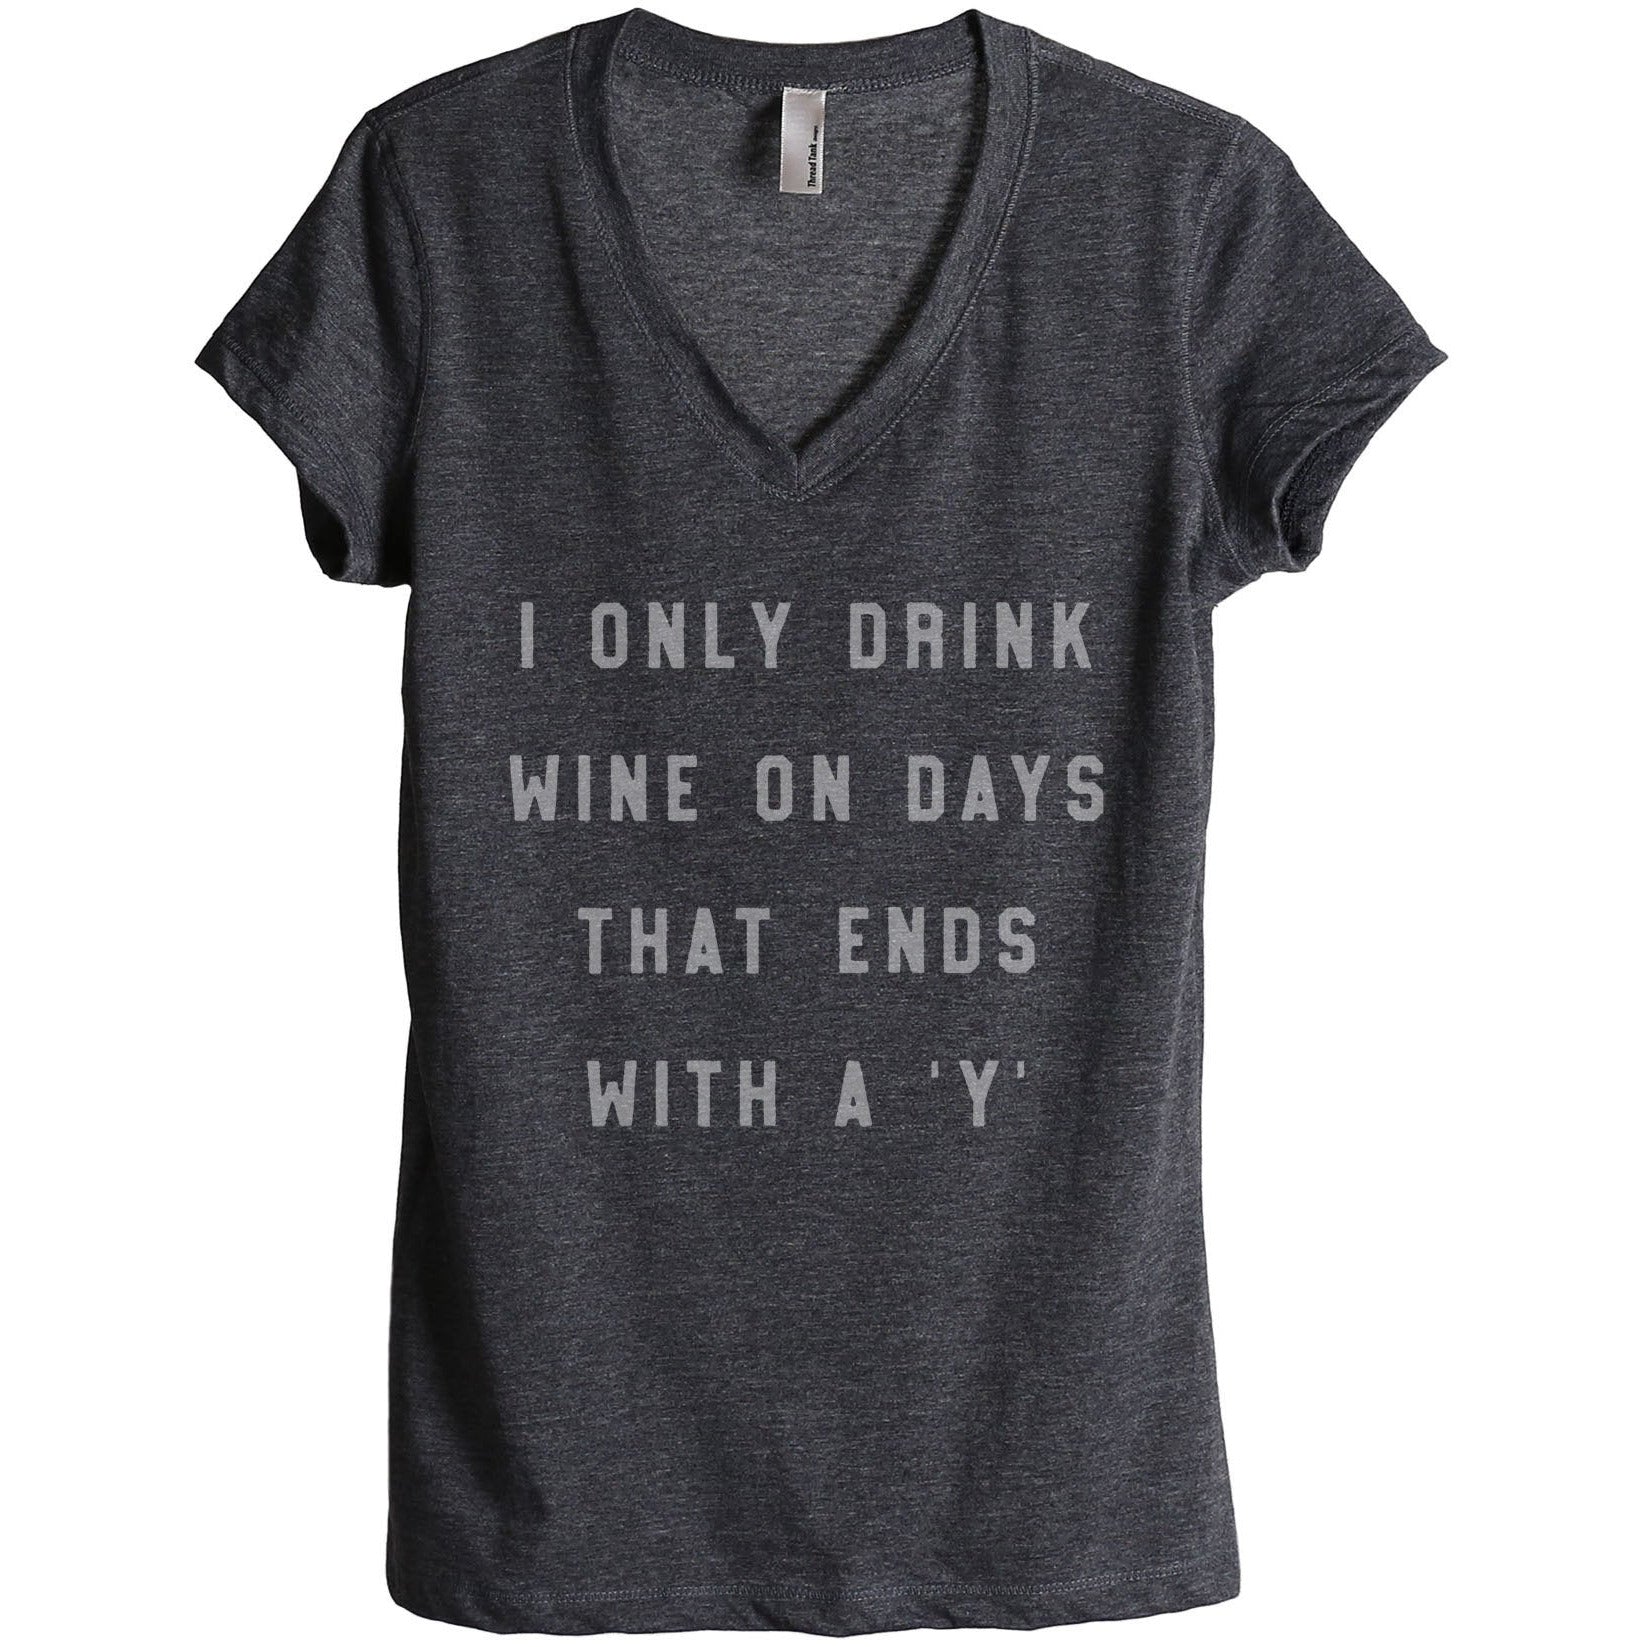 Drink Wine On Days Ends With Y Women's Relaxed Crewneck T-Shirt Top Tee Charcoal Grey